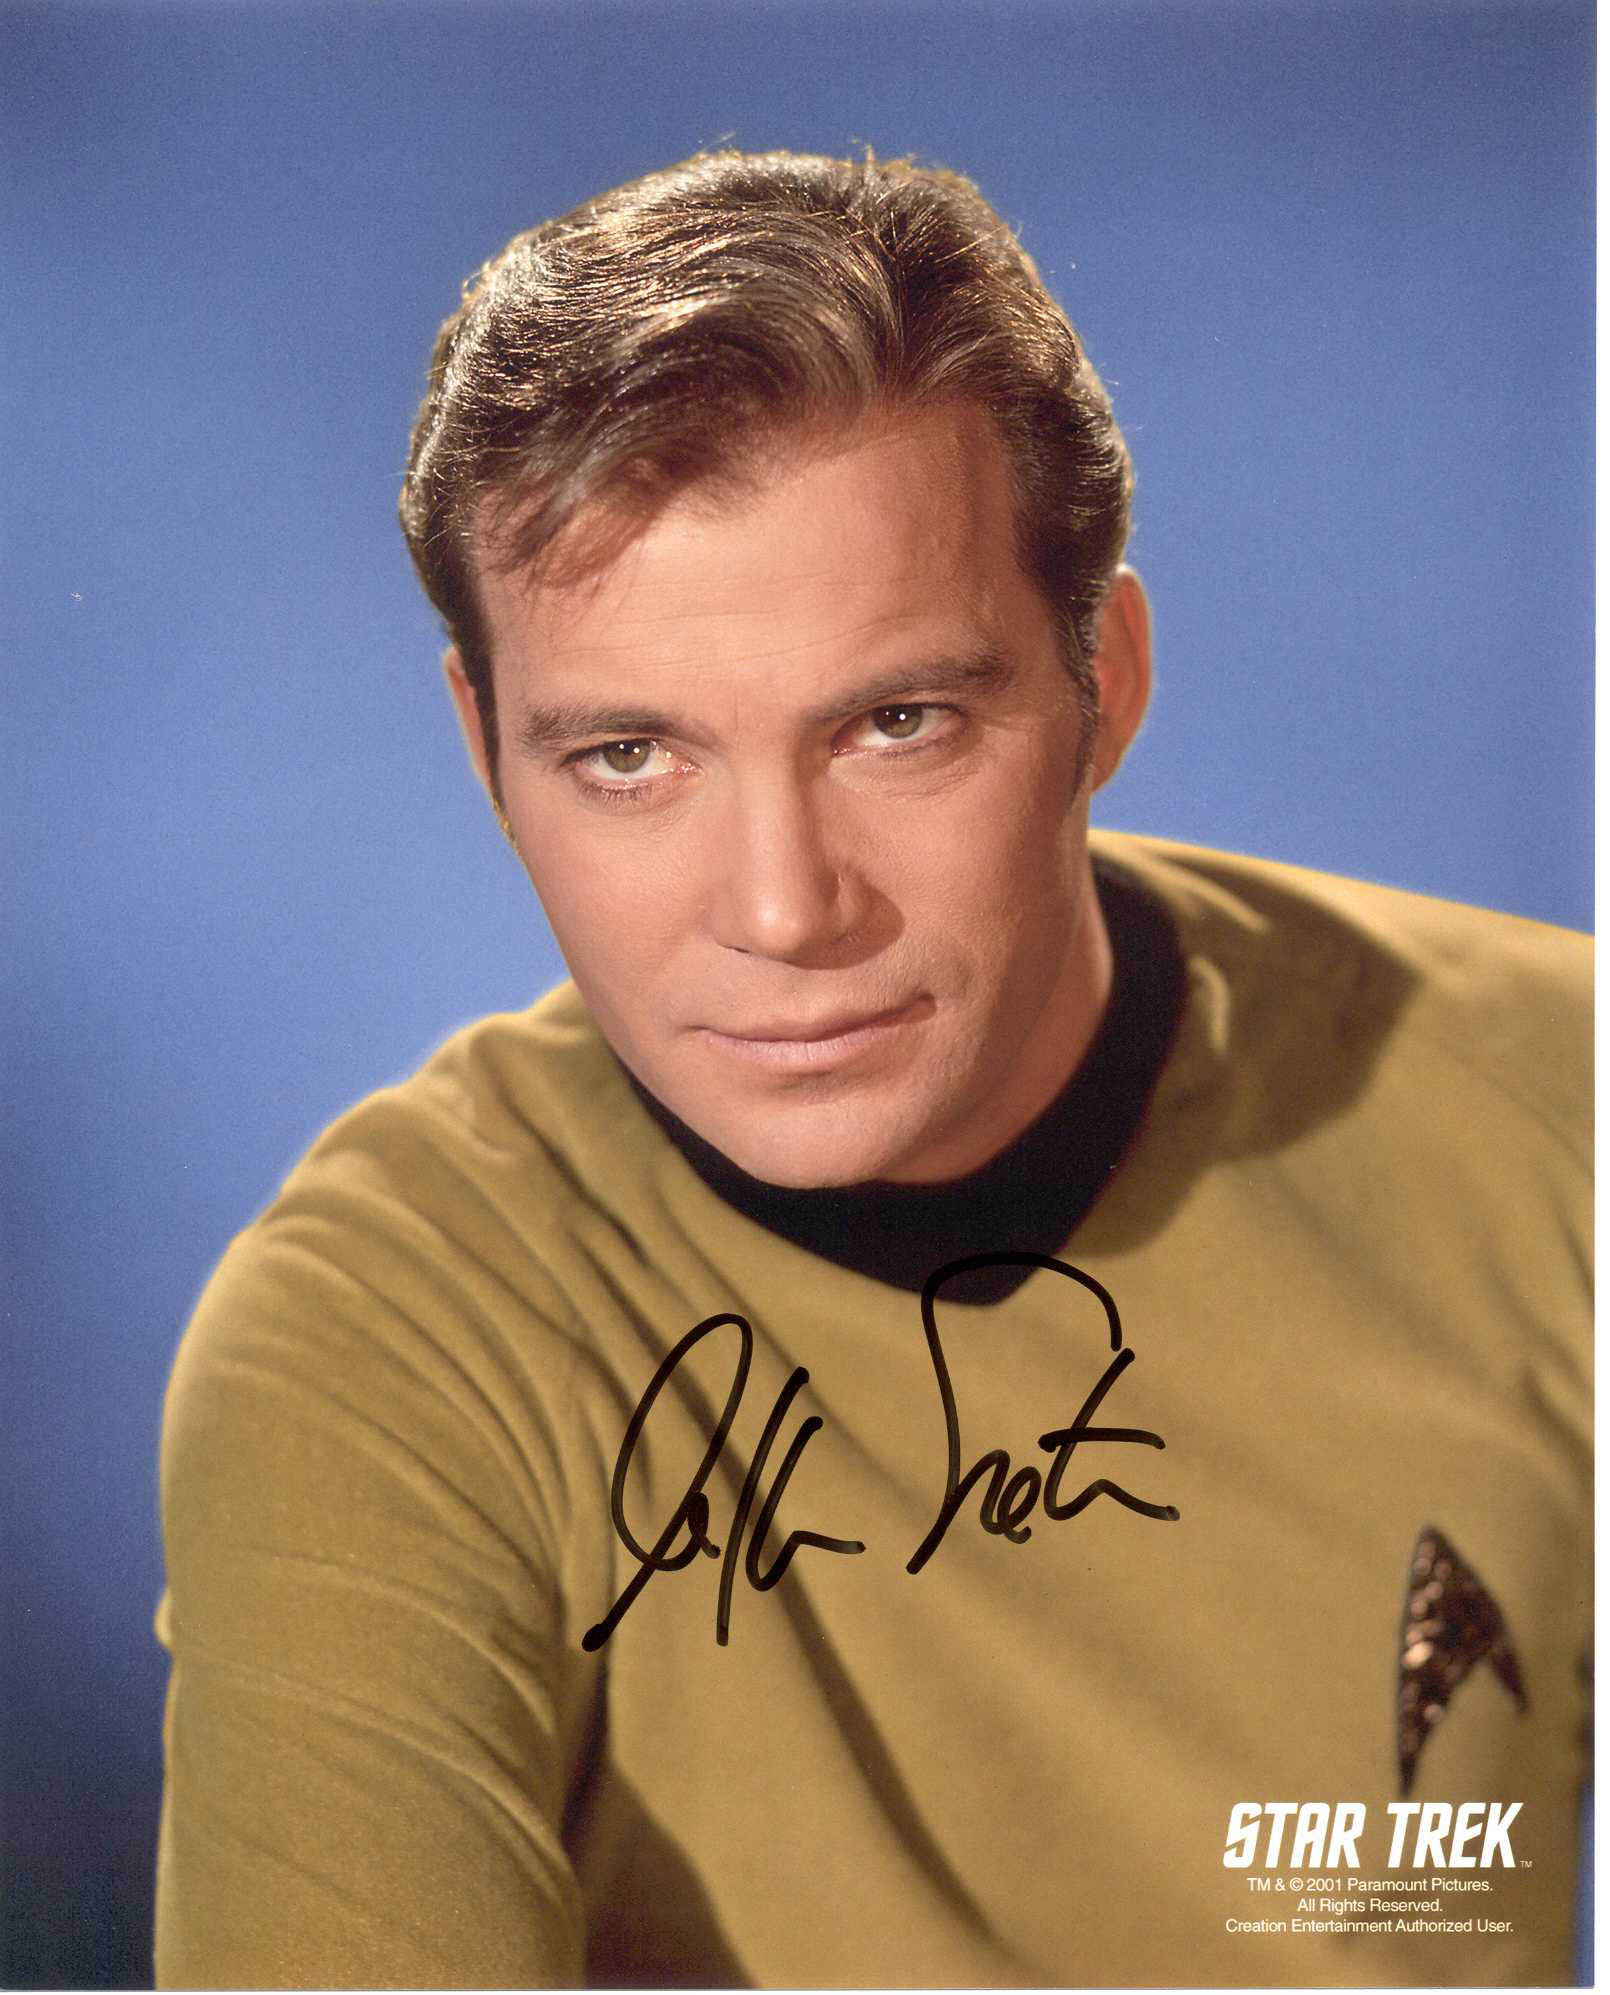 http://www.canadiancontent.net/images/people/picture/William-Shatner.jpg